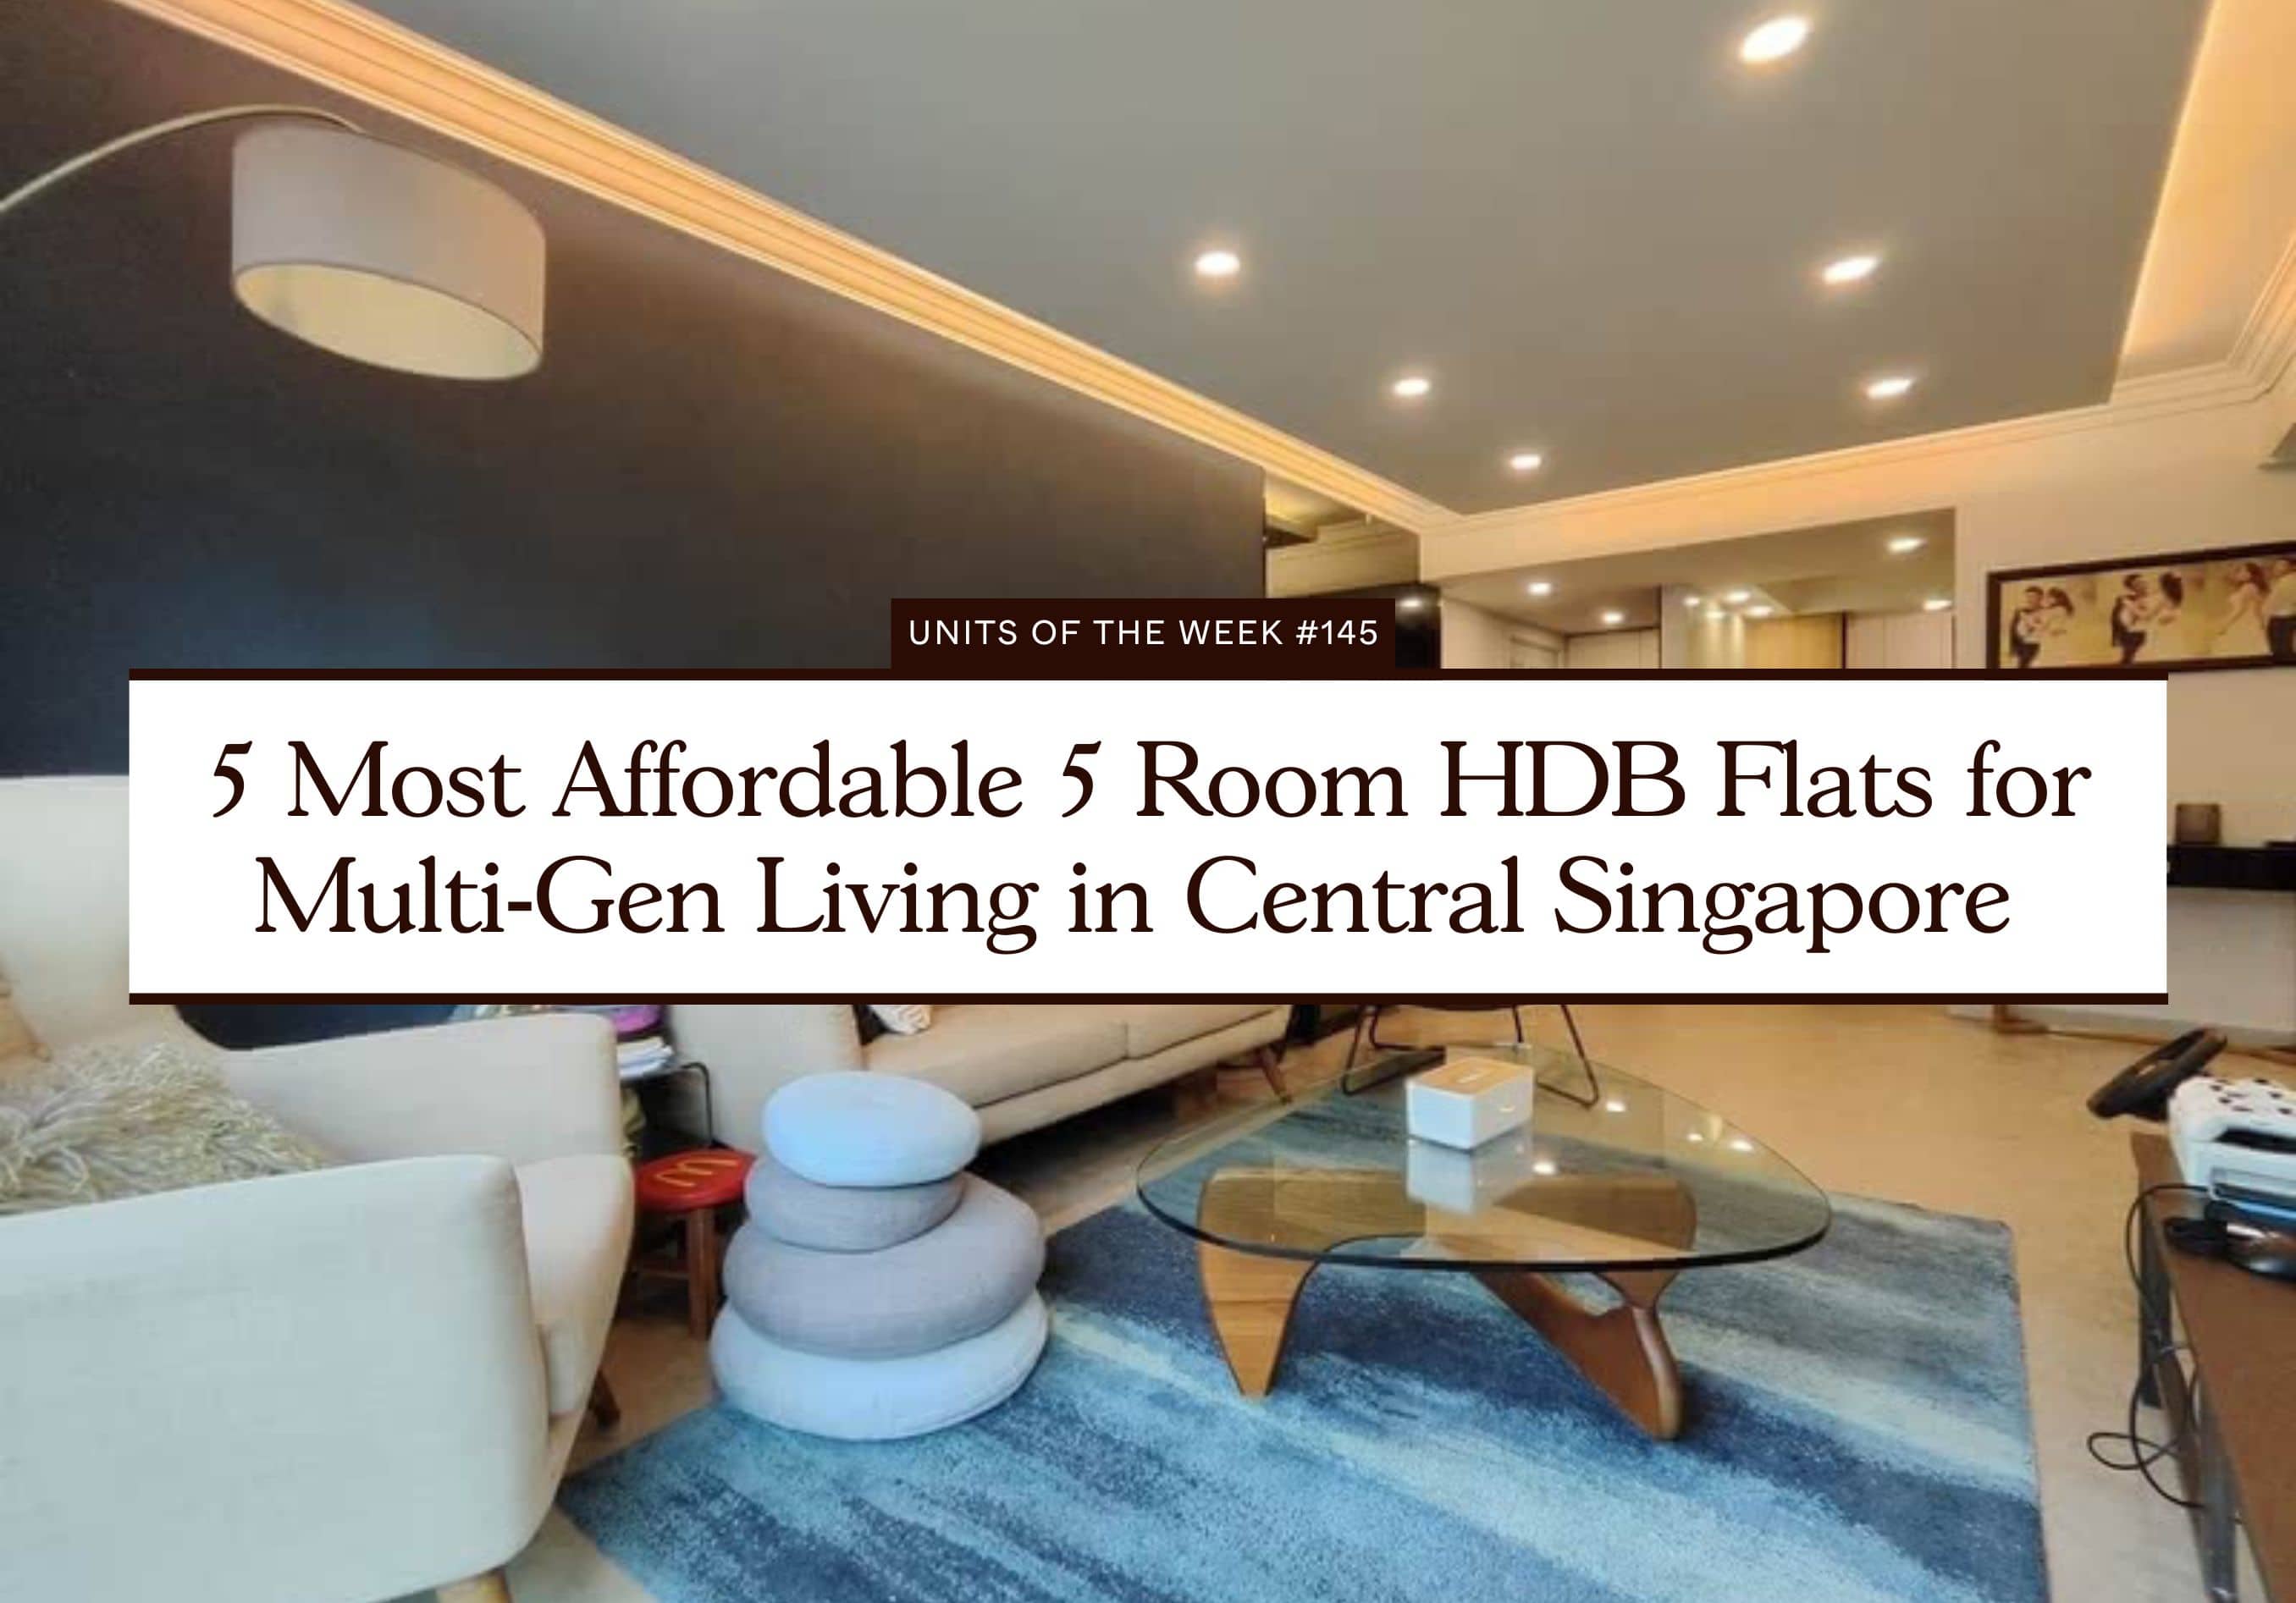 5 Most Affordable 5 Room HDB Flats for Multi Gen Living in Central Singapore